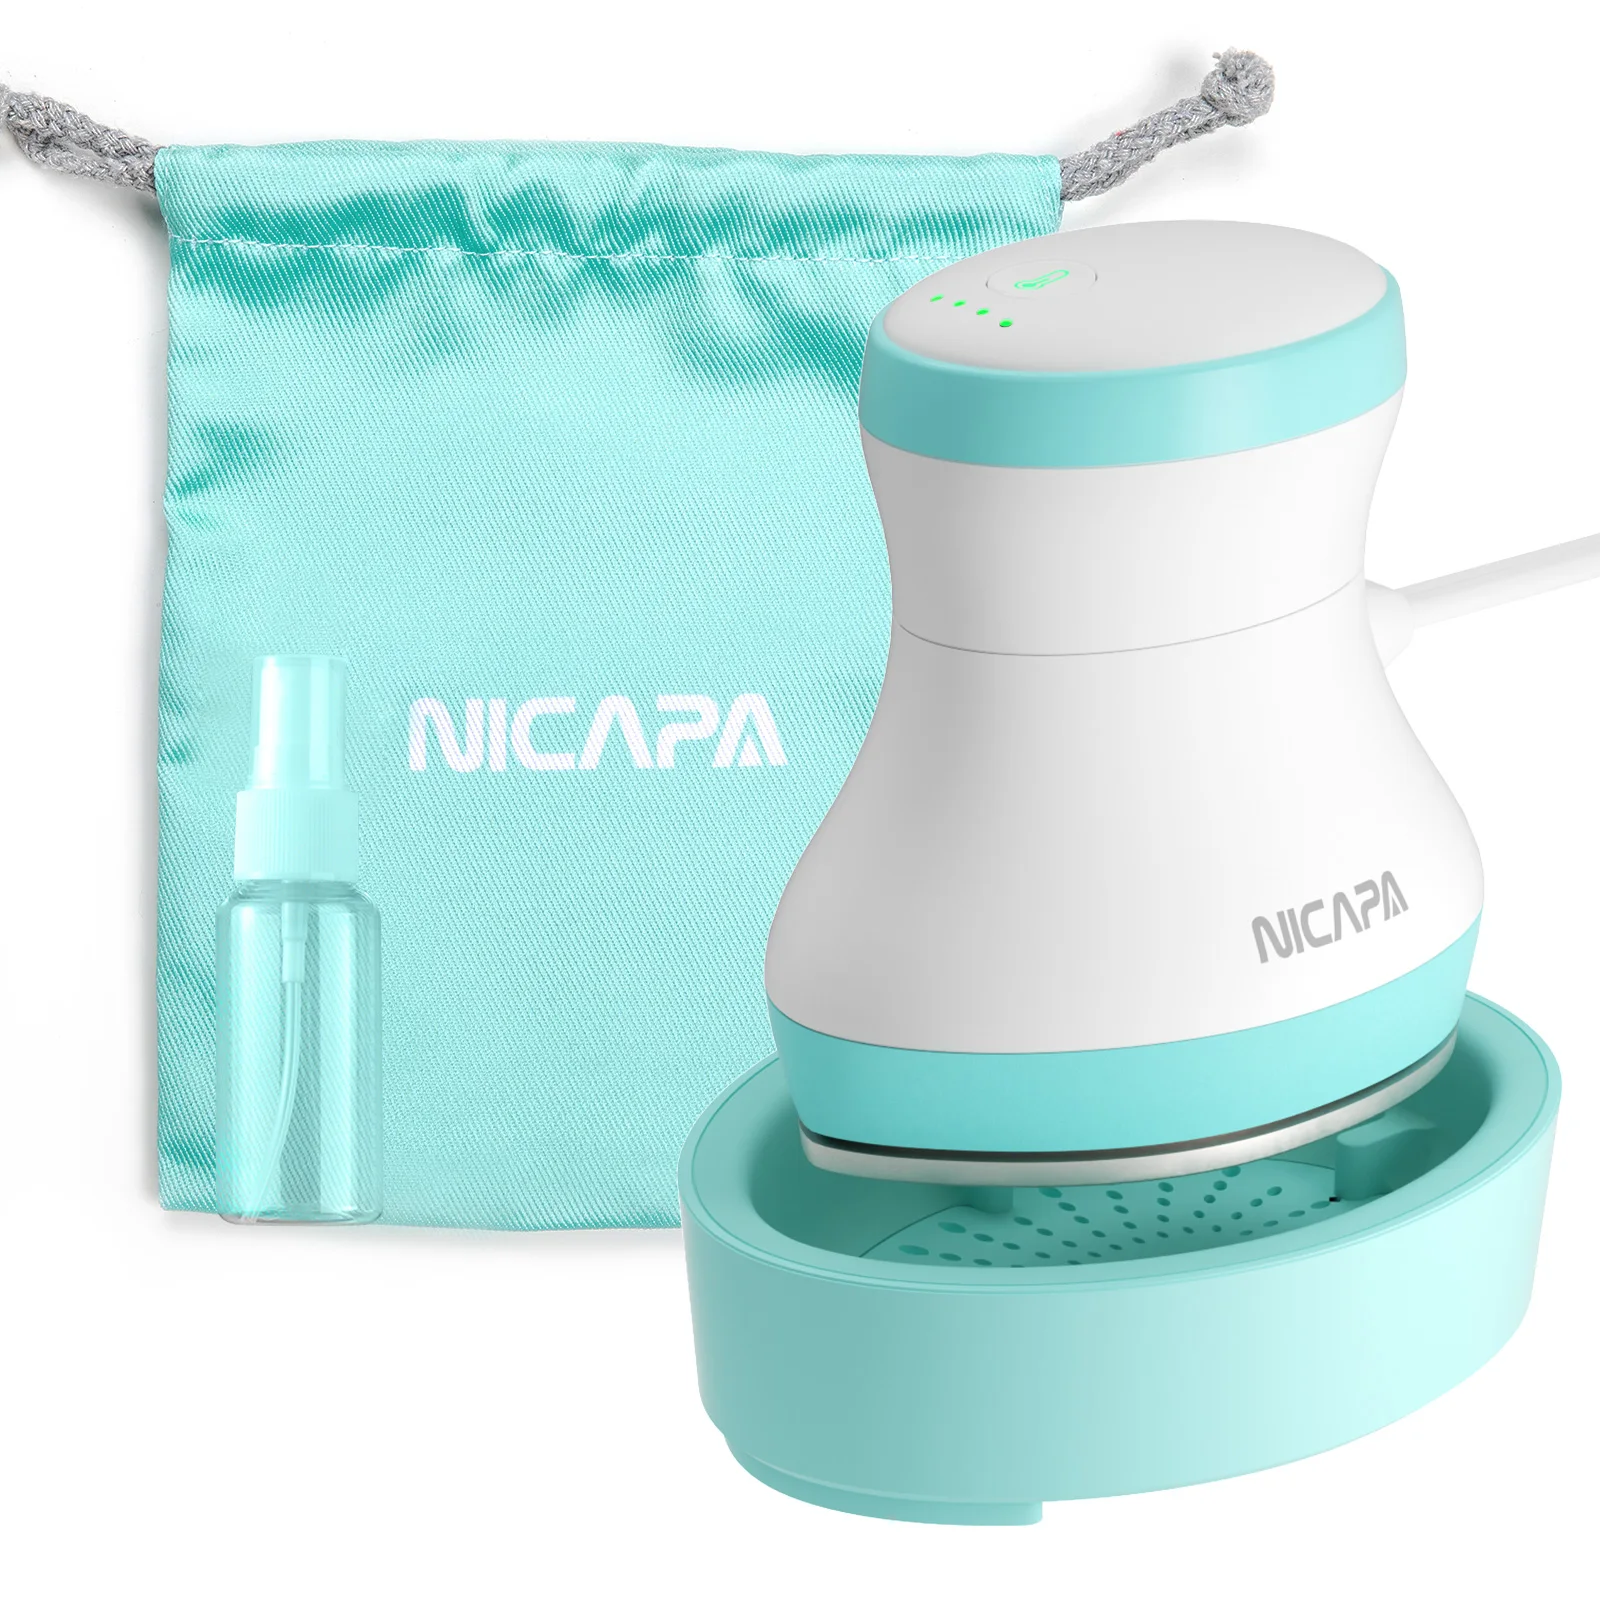 NICAPA Mini Heat Press Machine for T Shirts Shoes Hats Small HTV Vinyl Projects Portable Mini Iron Press for Sublimation Ink Transfer Projects and Heating Transfer-Pink 